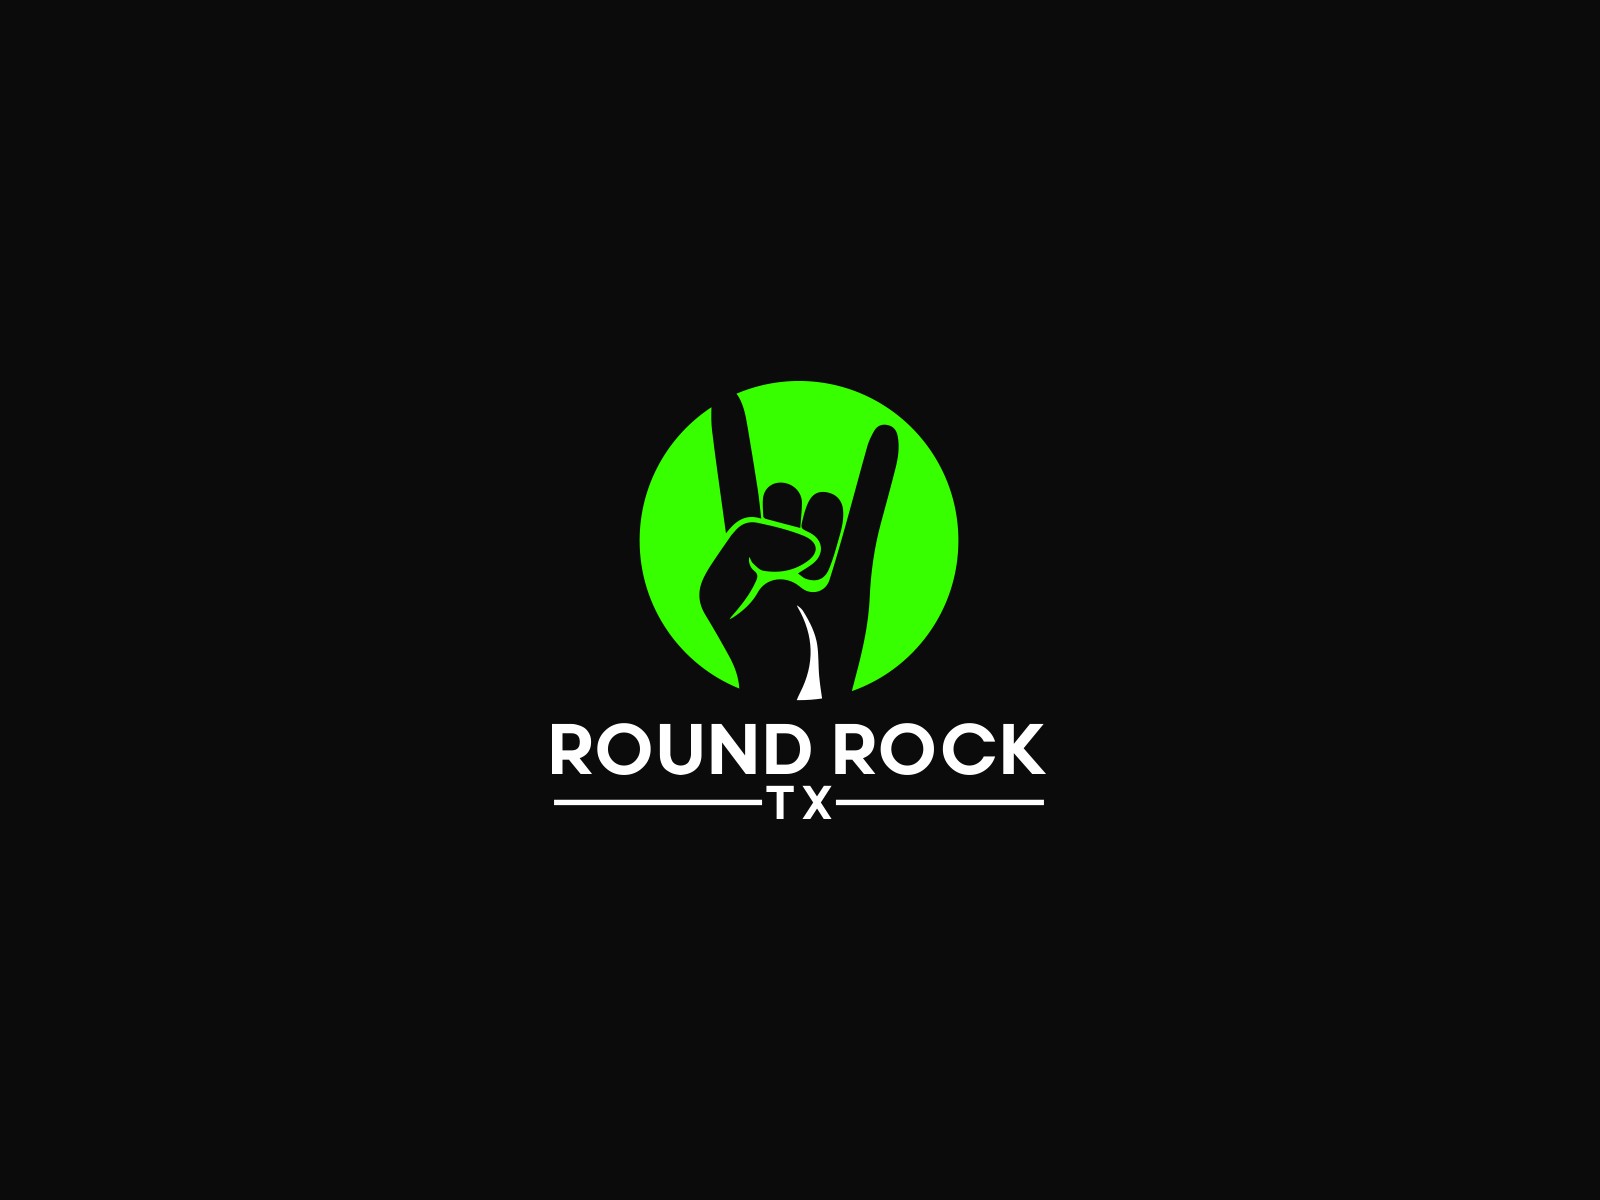 Round Rock Logo by designs MHR on Dribbble